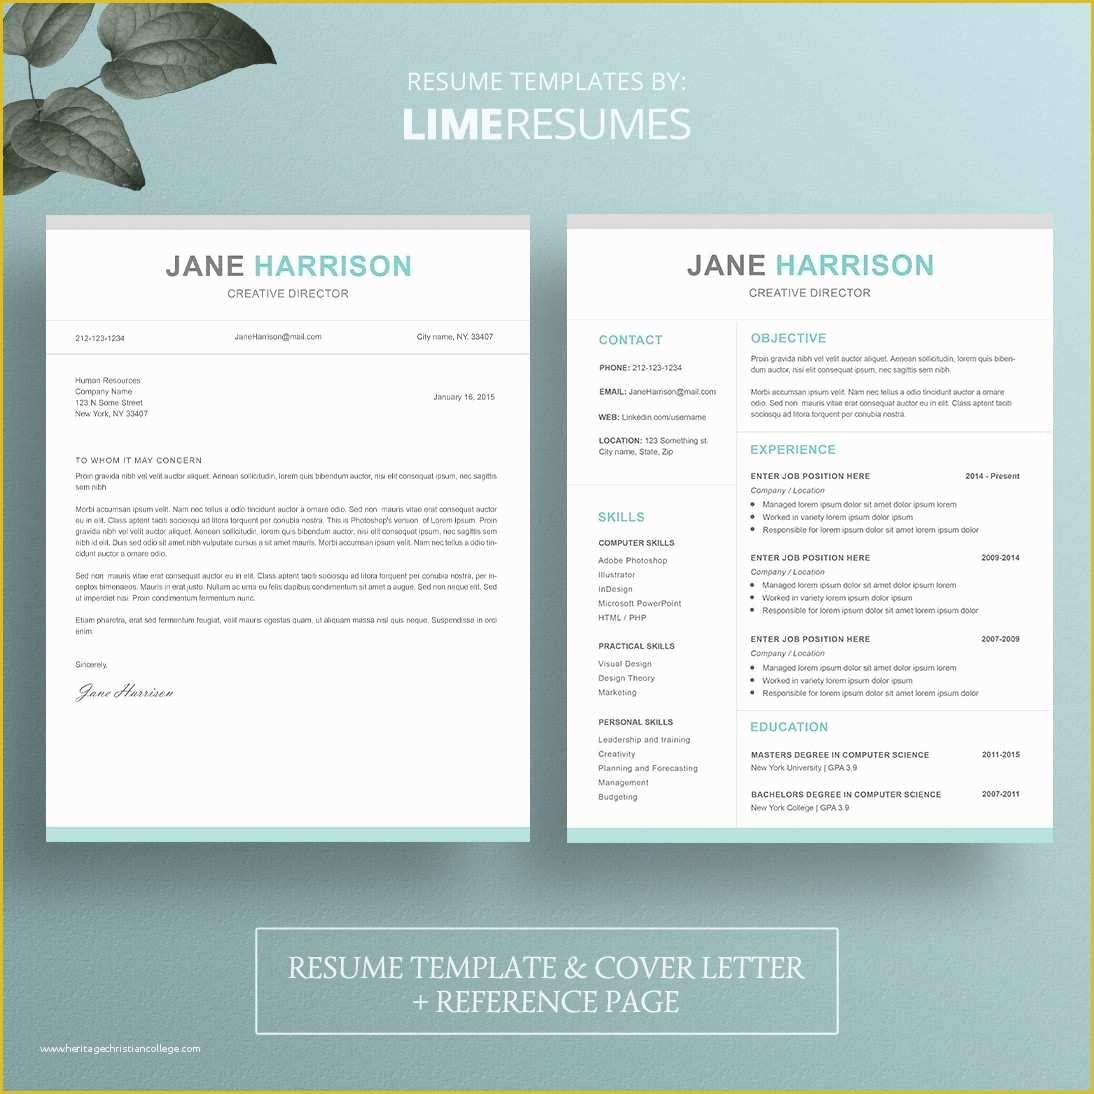 Free Awesome Resume Templates Microsoft Word Of Creative Resume Templates Free Download for Microsoft Word